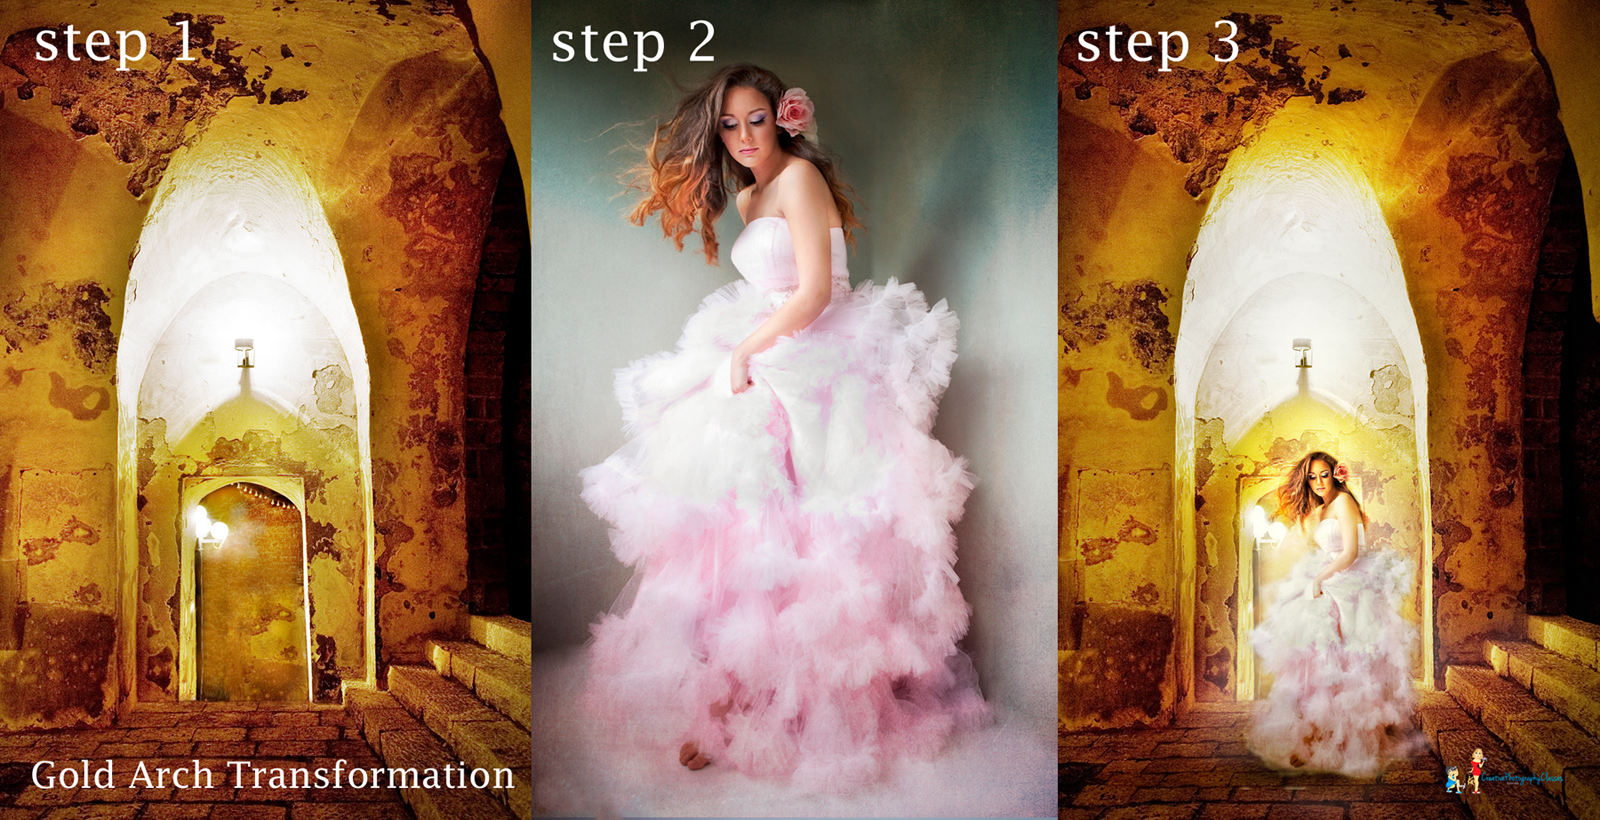 gold-arch-photoshop-template-transformation-creative-photography-classes